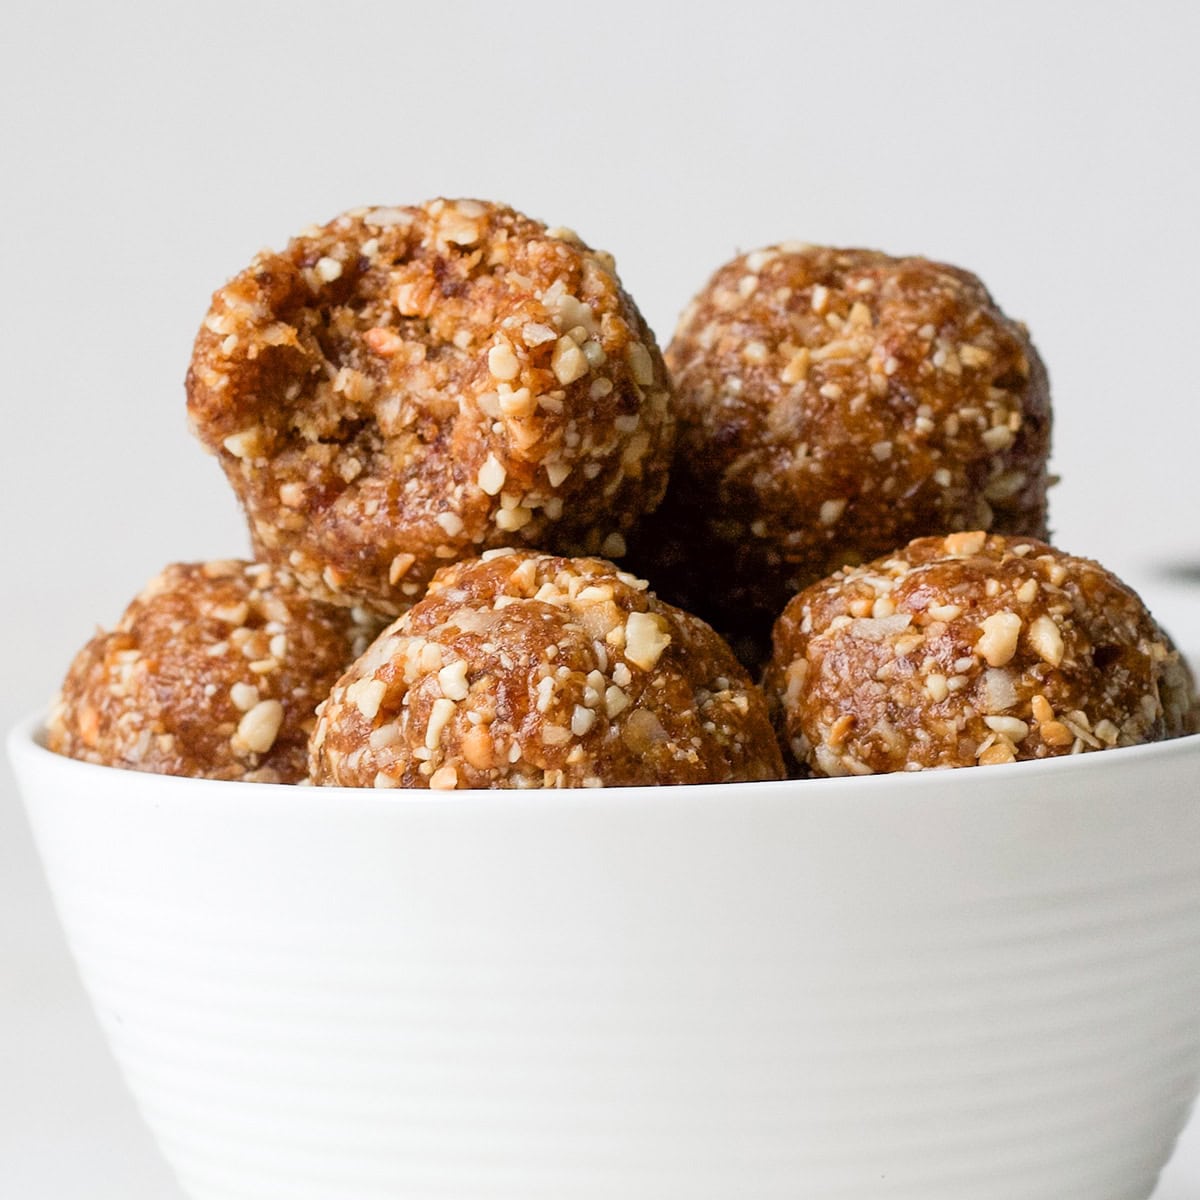 5 Cashew Coconut Date Balls in a bowl, one with a bite taken out of it